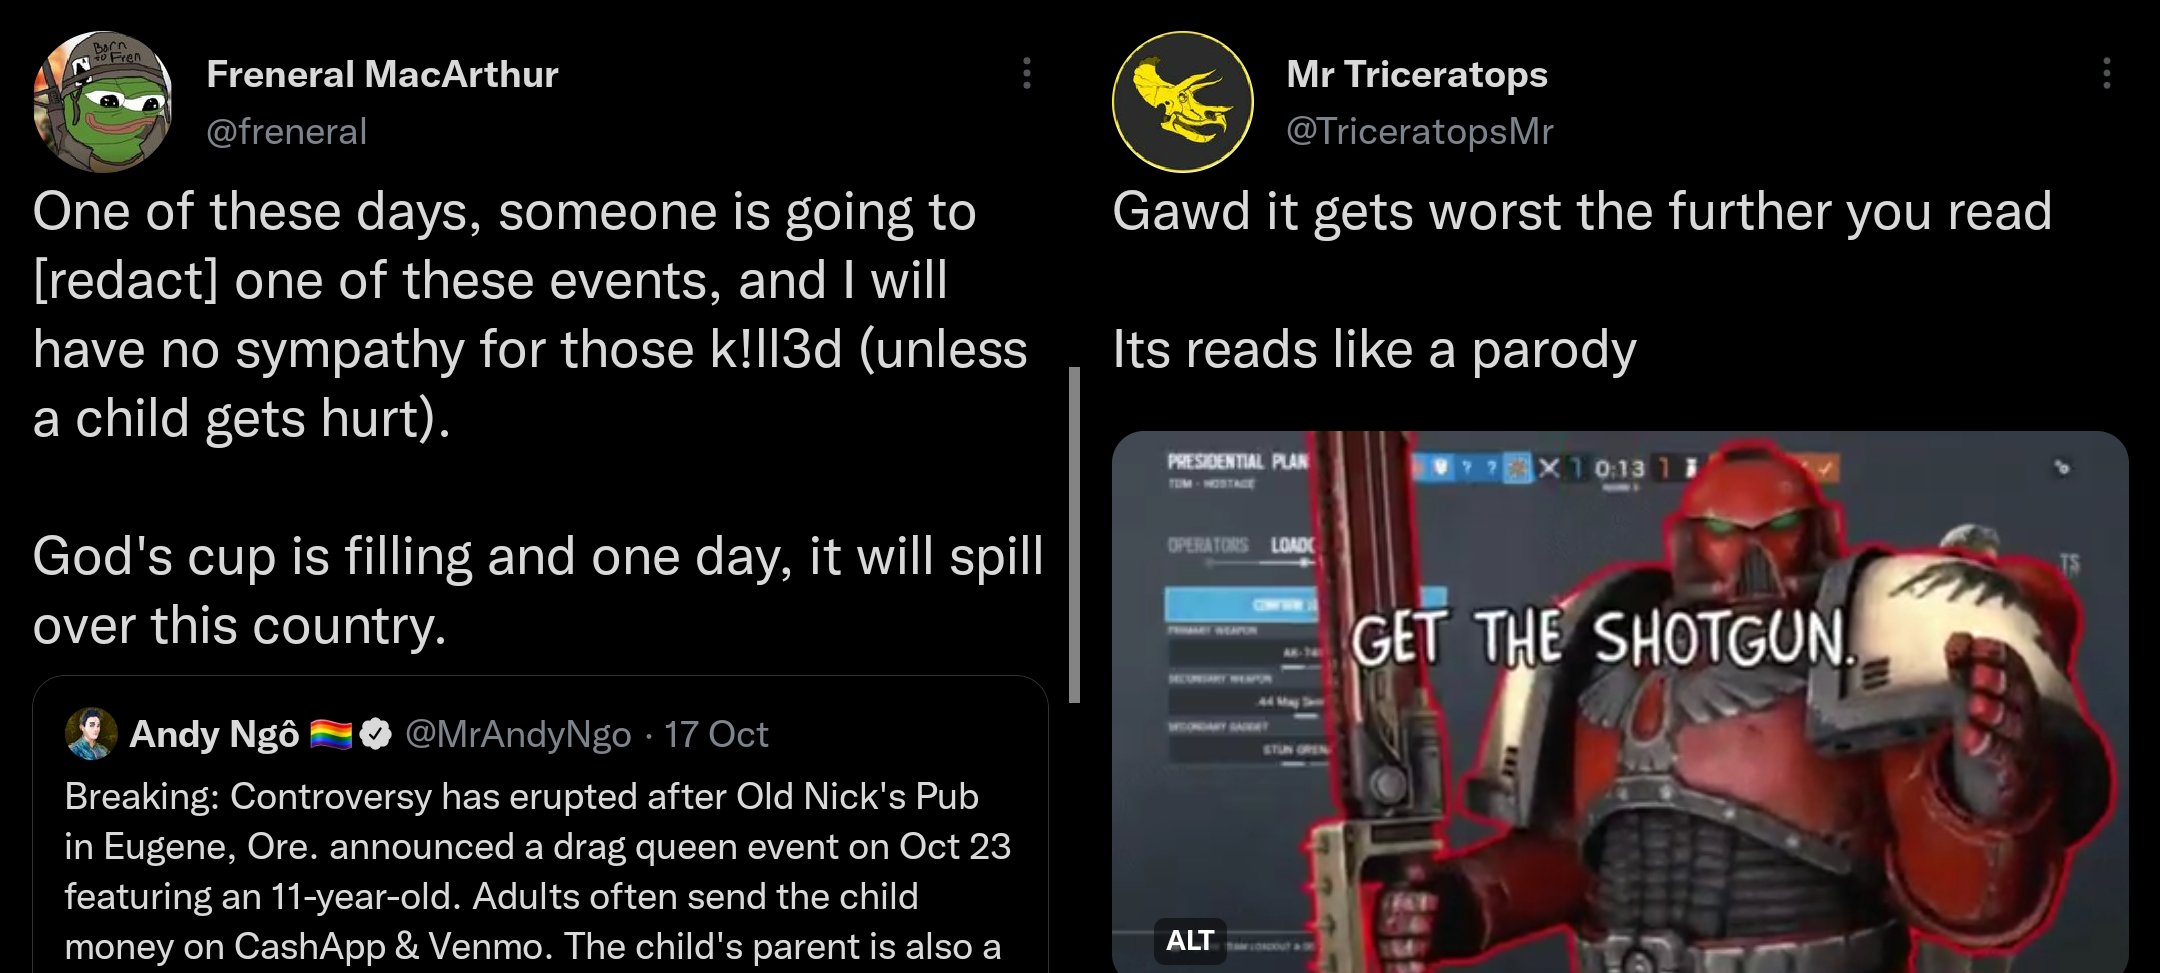 LEFT is a screenshot of an Andy Ngo follower's quote tweet by user freneral. It reads 'One of these days, someone is going to redact one of these events, and I will have no sympathy for those kilIed (unless a child gets hurt). God's cup is filling and one day, it will spill over this country.' The bottom of the tweet shows its posting date as the morning of 18 Oct 22. RIGHT is A screenshot of a Quote Tweet from a follower of Andy Ngo, user TriceratopsMR, that shows a warhammer video game character and the text 'GET THE SHOTGUN.' The tweet's message reads 'Gawd it gets worst the further you read Its reads like a parody.'